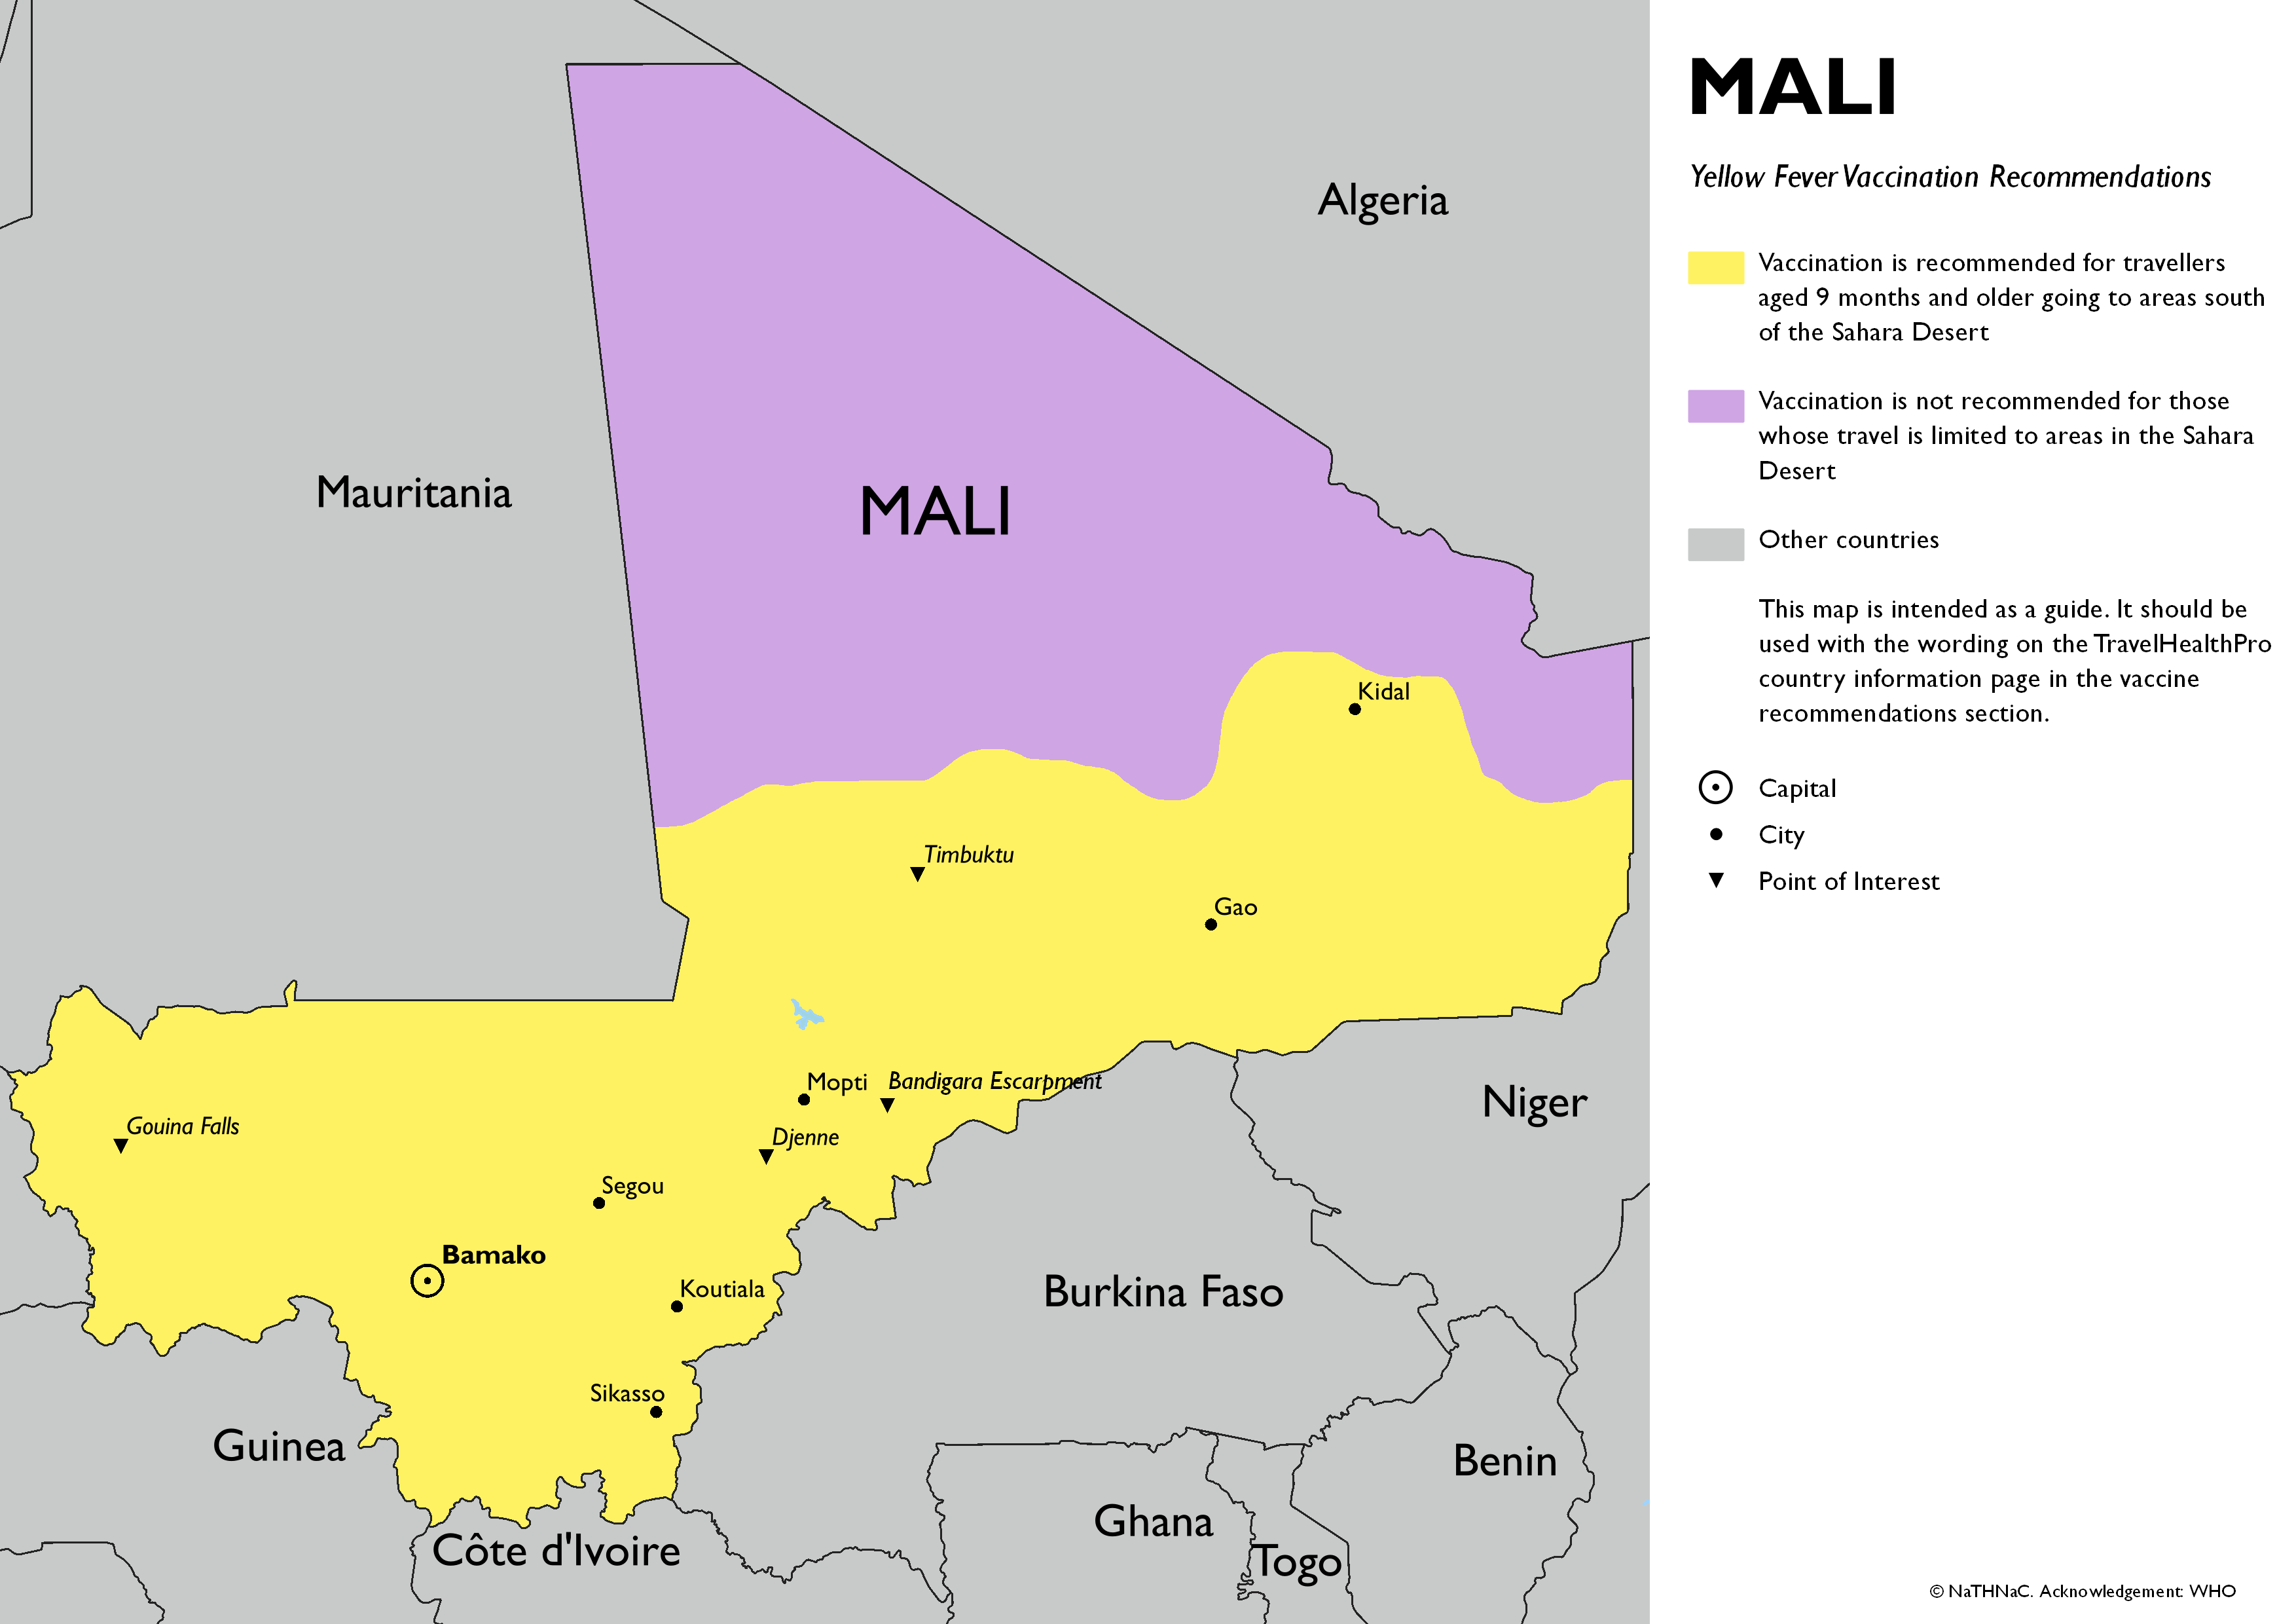 Yellow fever vaccine recommendation map for Mali